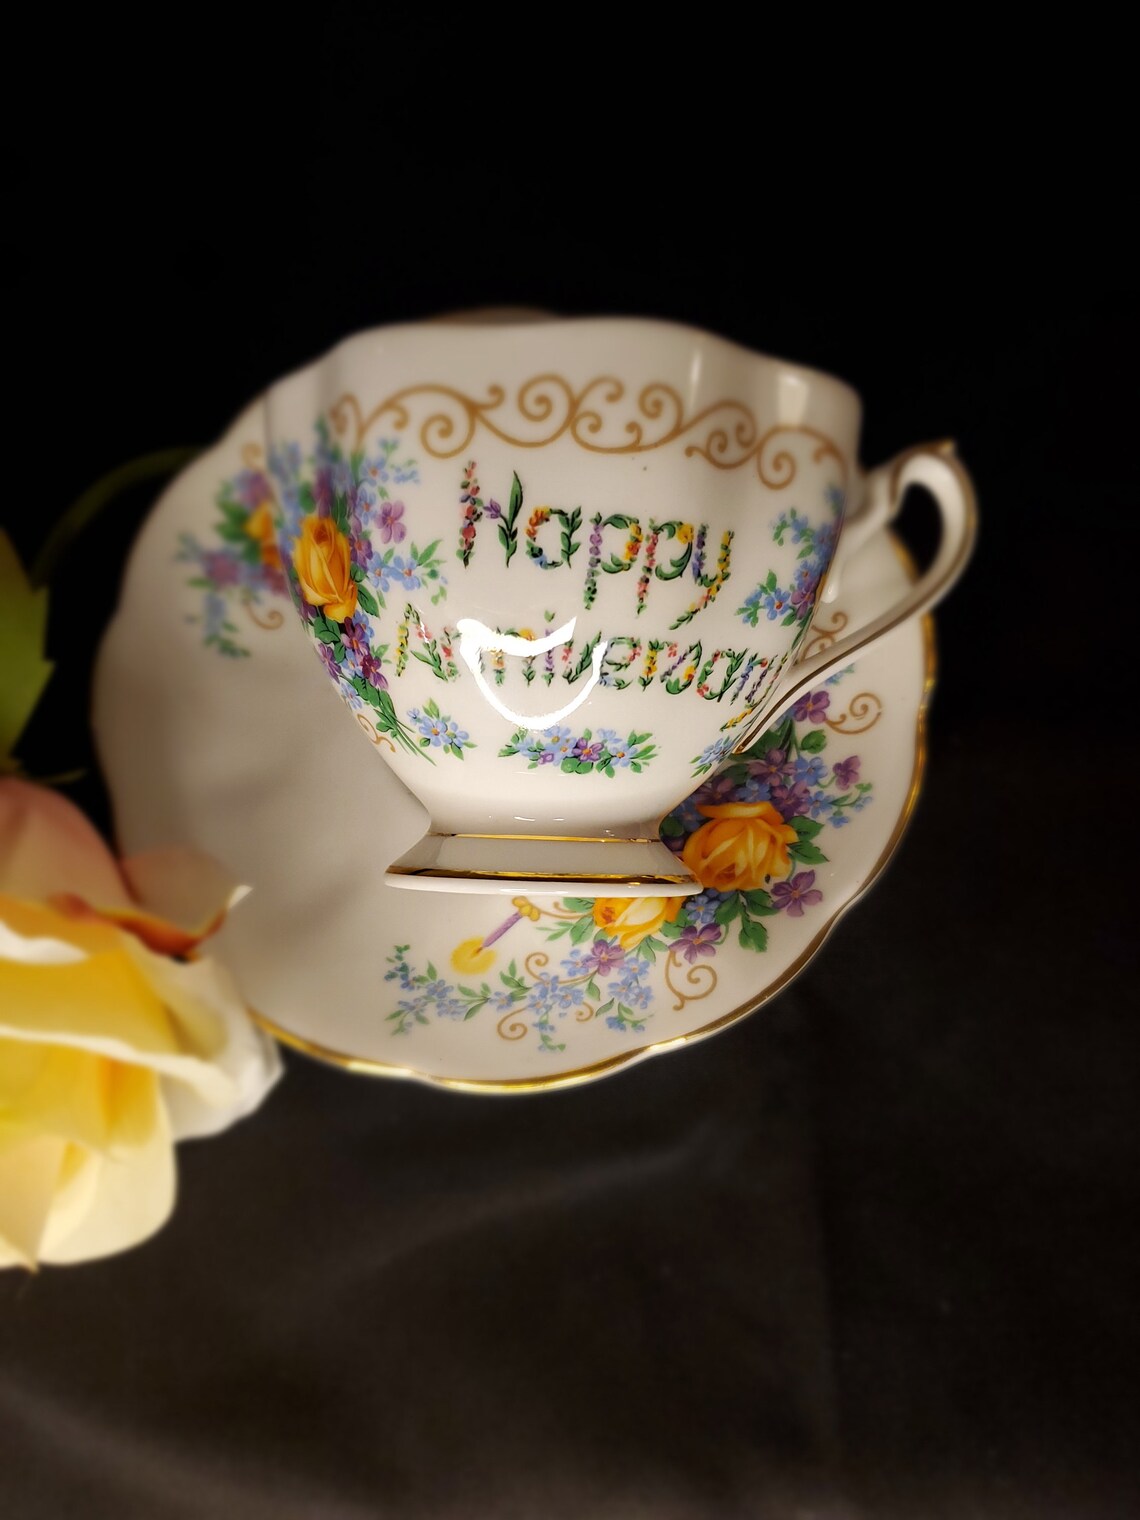 Vintage Happy Anniversary Teacup With Saucer Etsy New Zealand